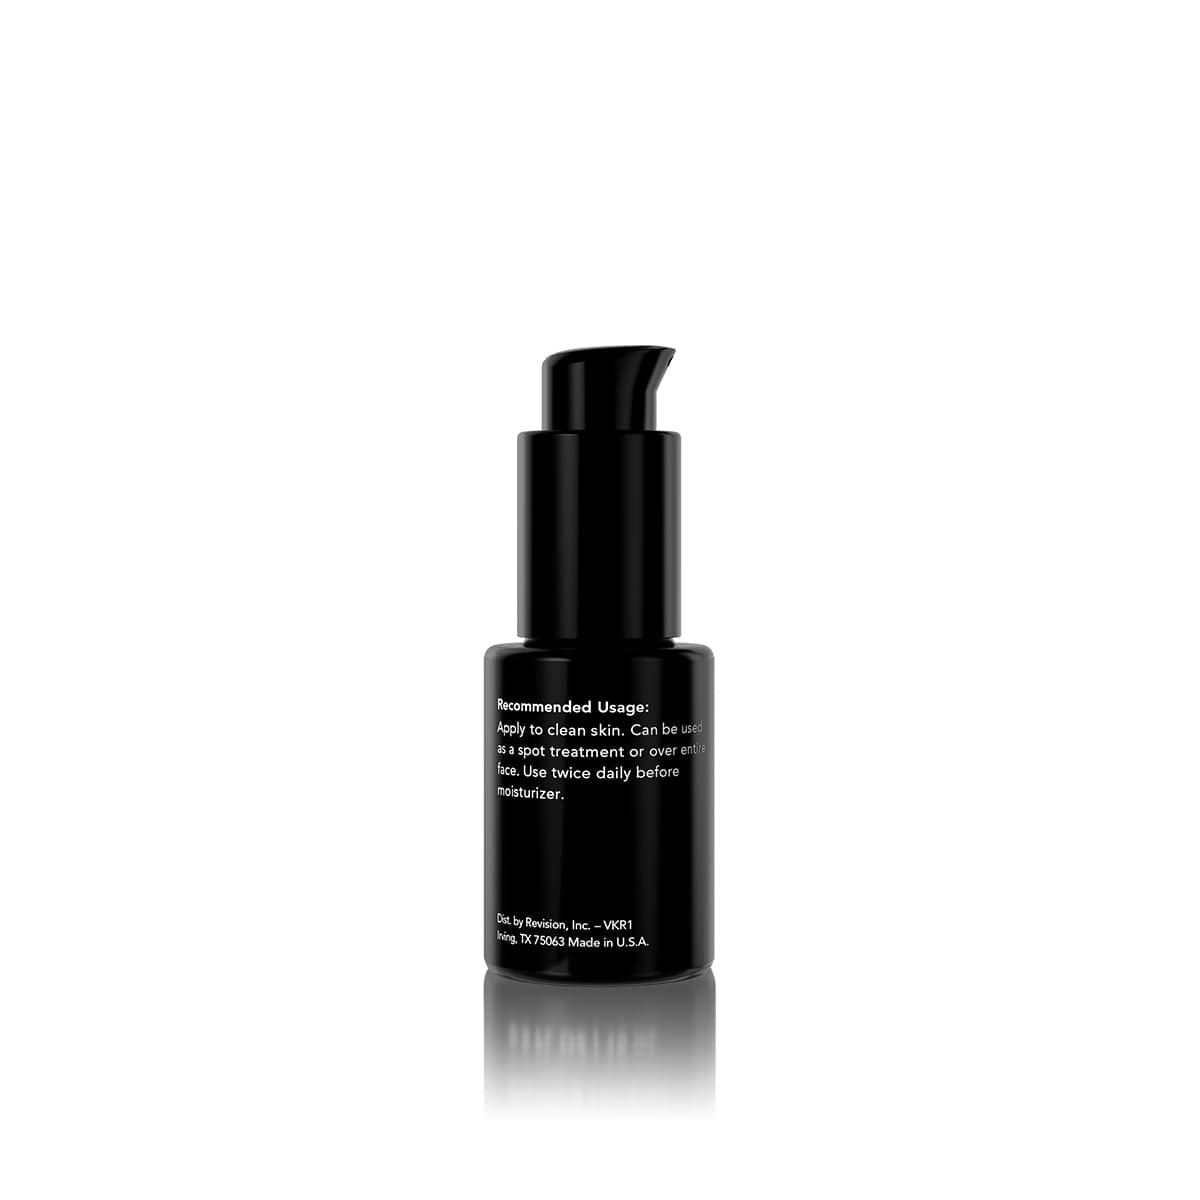 Vitamin K Serum- soothing complex with arnica montana extract. Pump Back